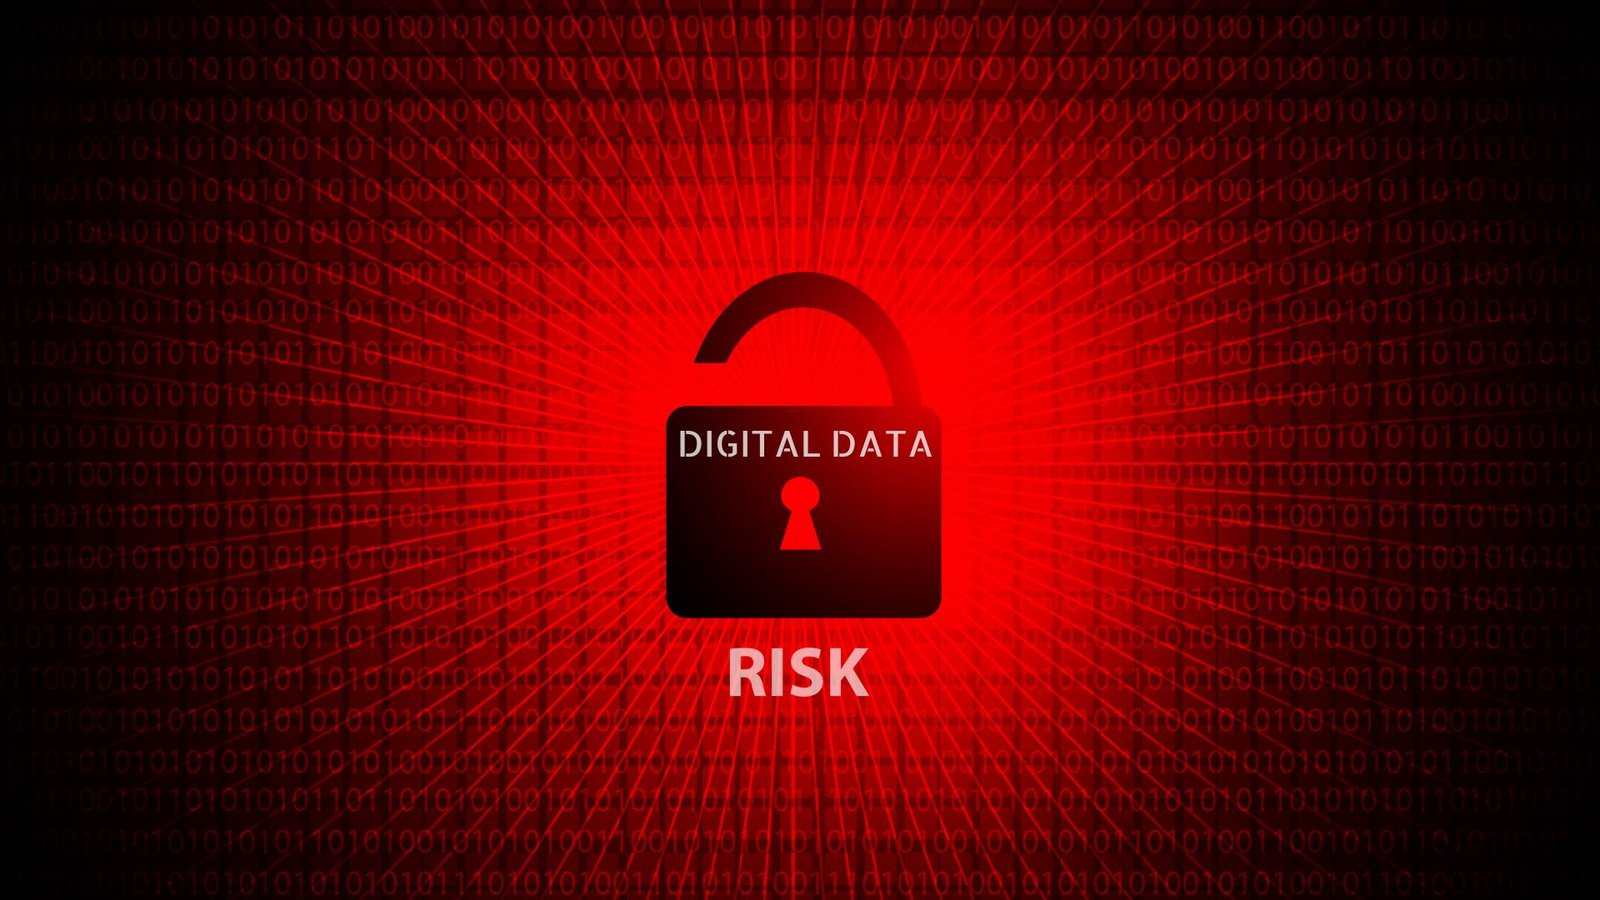 Digital Data May Be at Risk, Lawforeverything